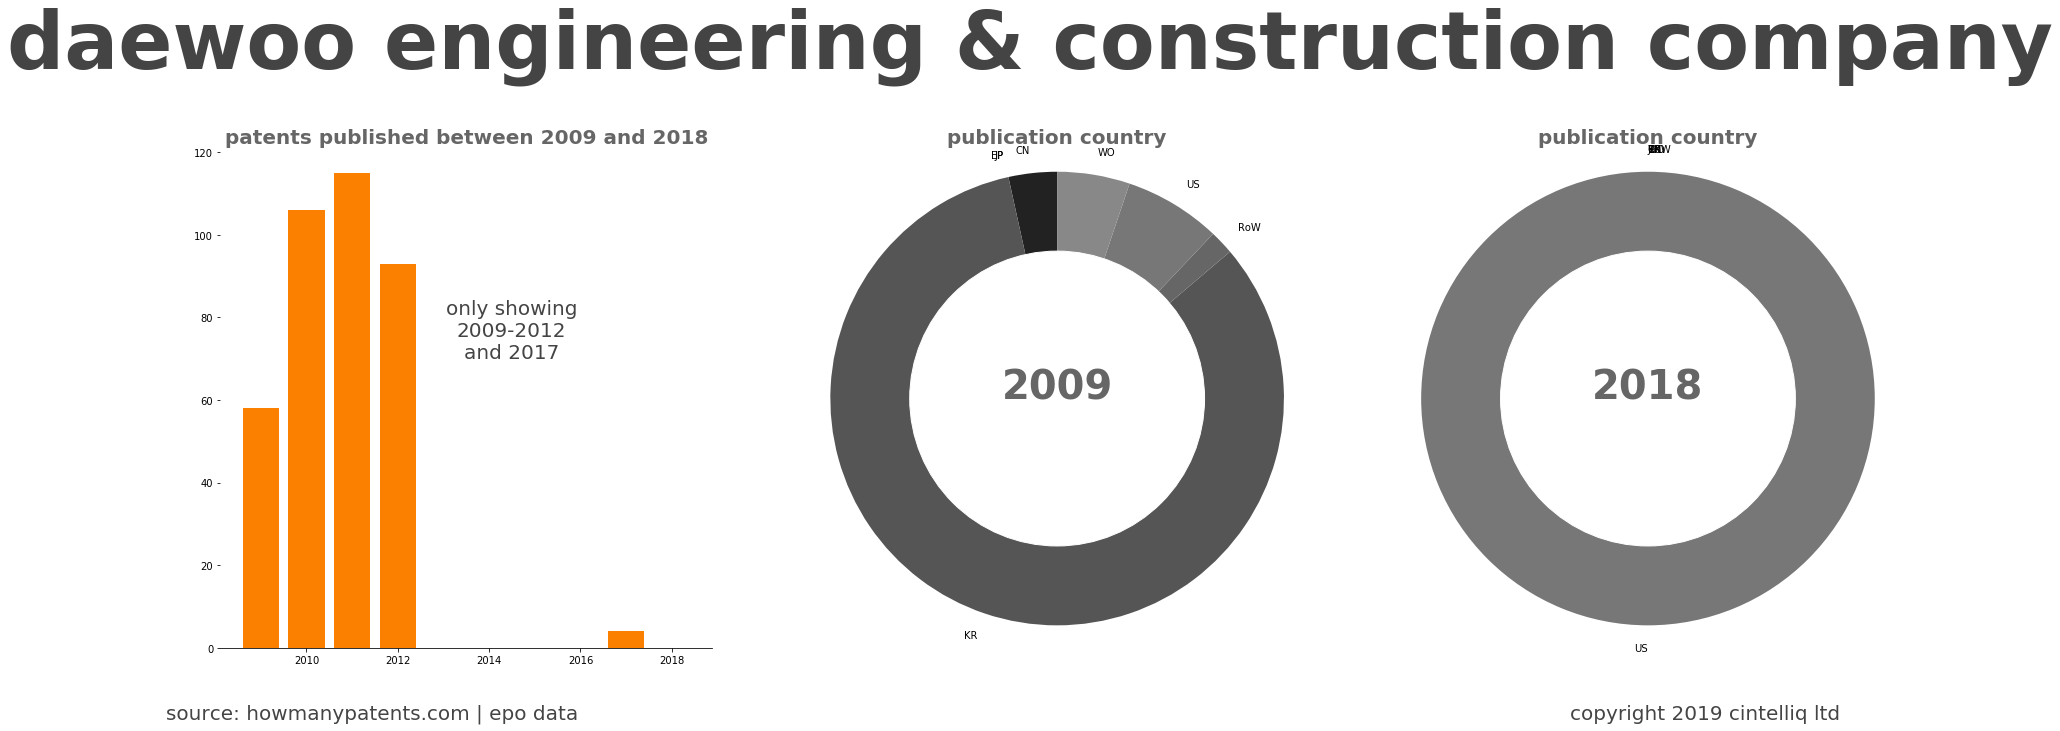 summary of patents for Daewoo Engineering & Construction Company